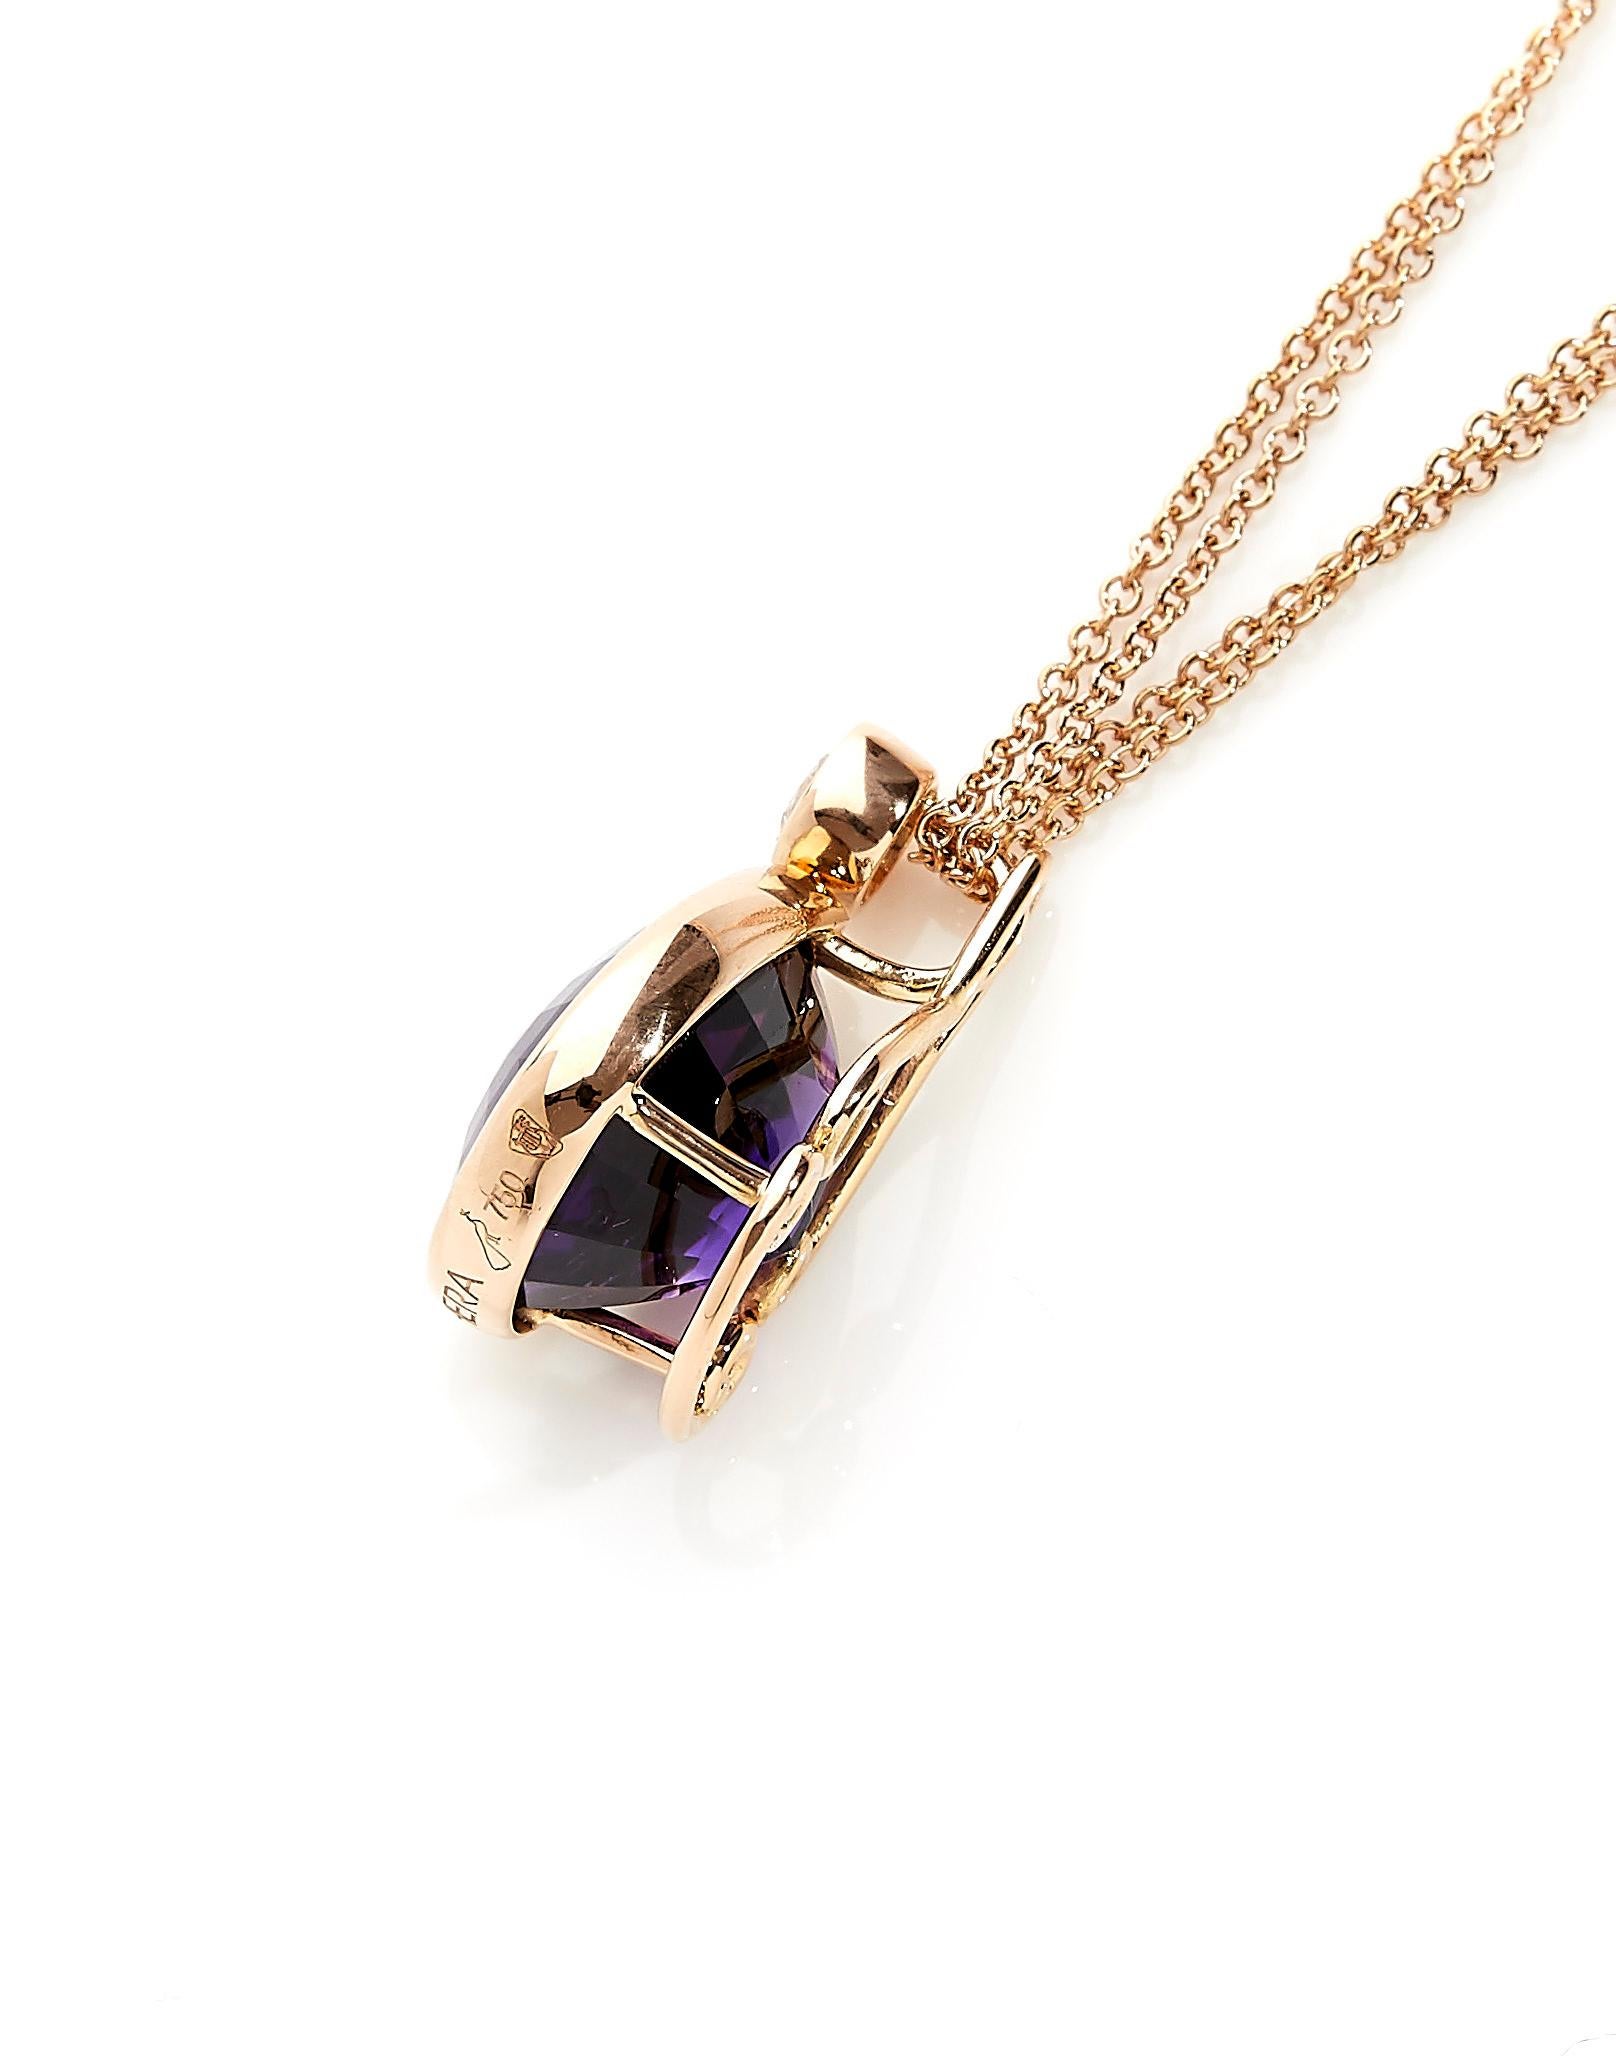 Contemporary 18 Karat Rose Gold Pendant Necklace set with 9.21 Carat Amethyst and Diamond  For Sale